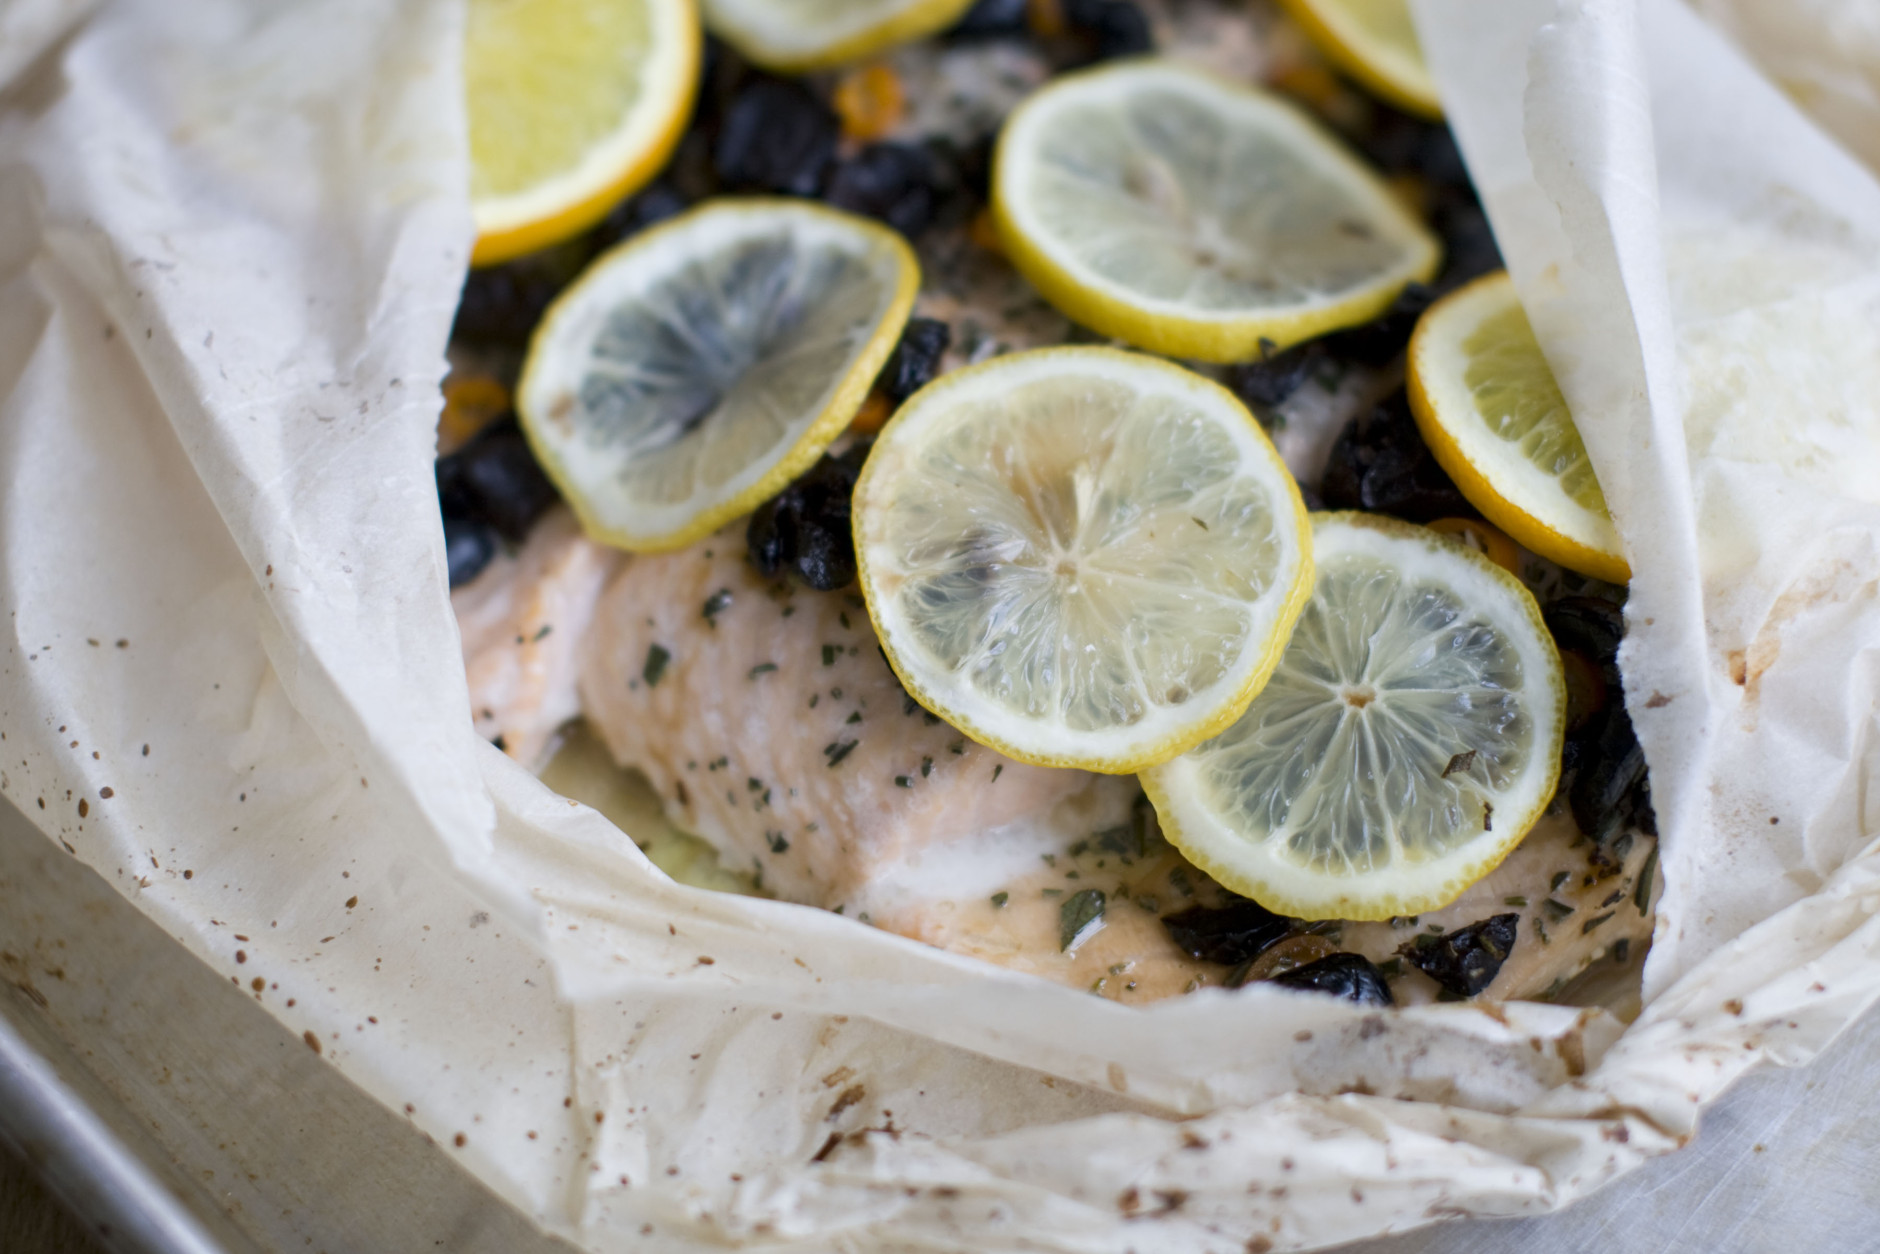 This Dec. 2, 2013 photo shows salmon baked in a bag with citrus, olive and chilies in Concord, N.H. The bag keeps the flavor and moisture trapped inside during cooking, allowing the juices from the fish and the other ingredients to mingle and become a wonderful sauce. (AP Photo/Matthew Mead)